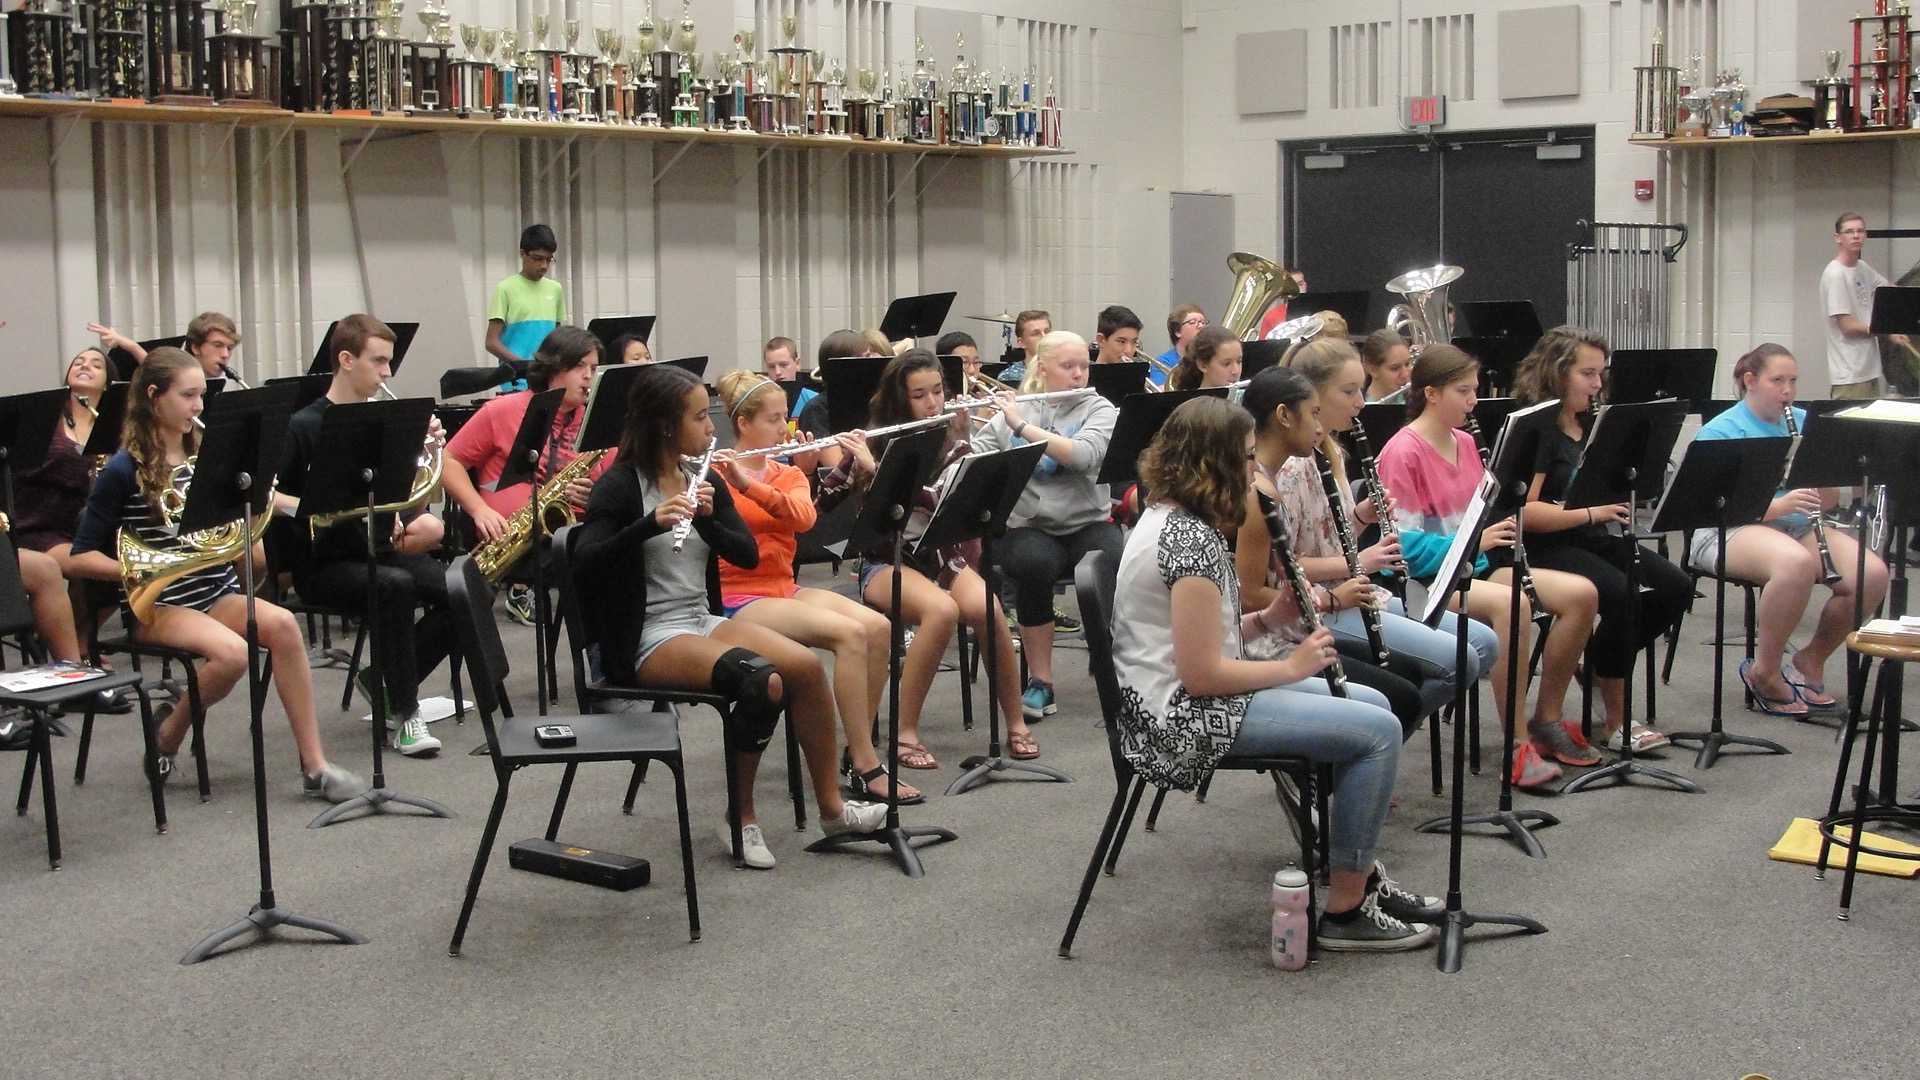 The Symphonic Winds band plays their hearts out. (Sept. 21-25)